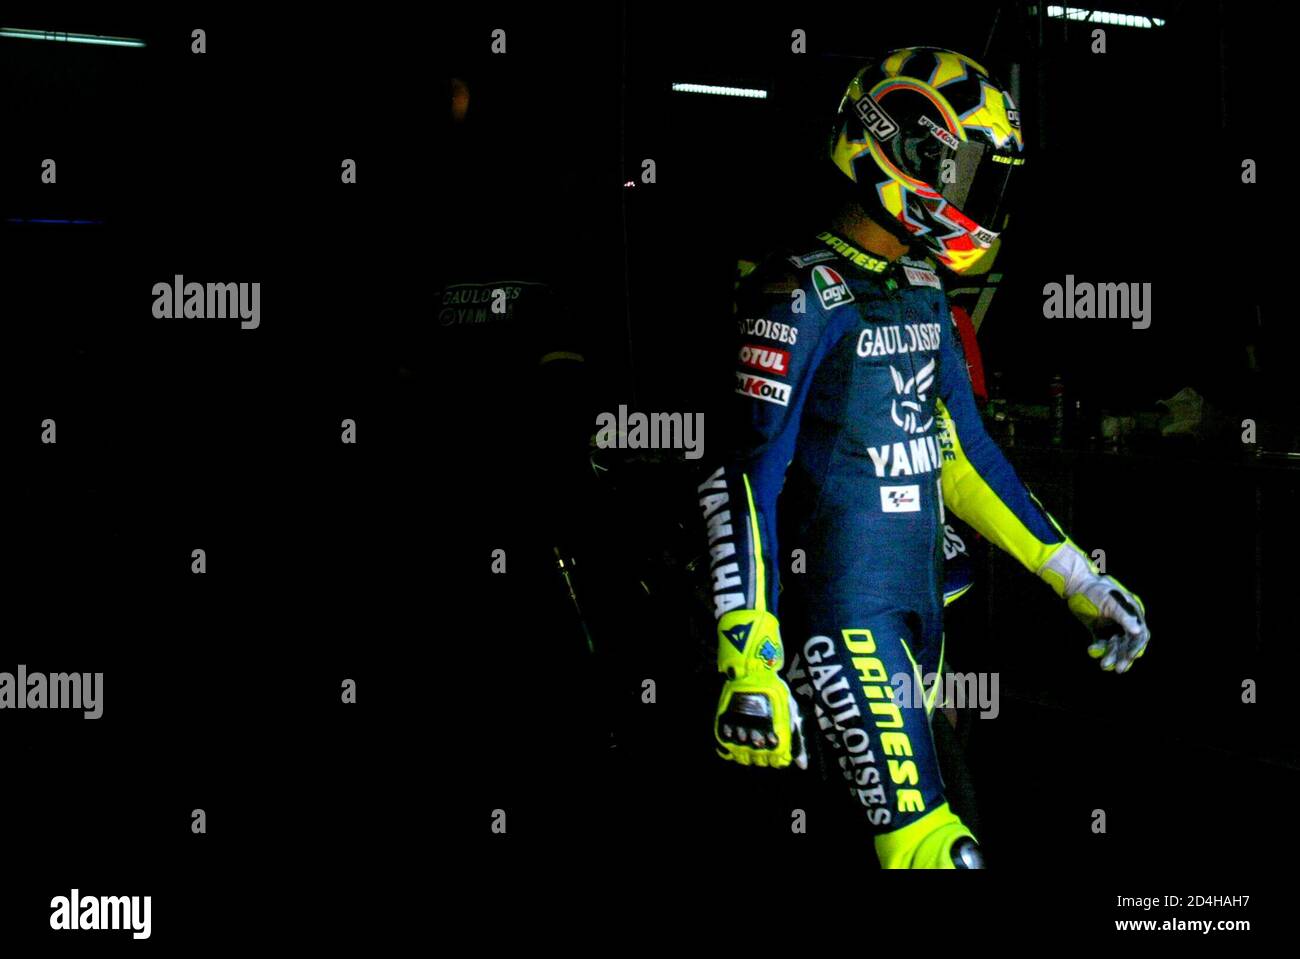 MotoGP rider Rossi walks to his Yamaha during first free practice at  Catalan Motorcycle Grand Prix near Barcelona. MotoGP rider Valentino Rossi  "Il Doctor" of Italy walks to his Yamaha from the